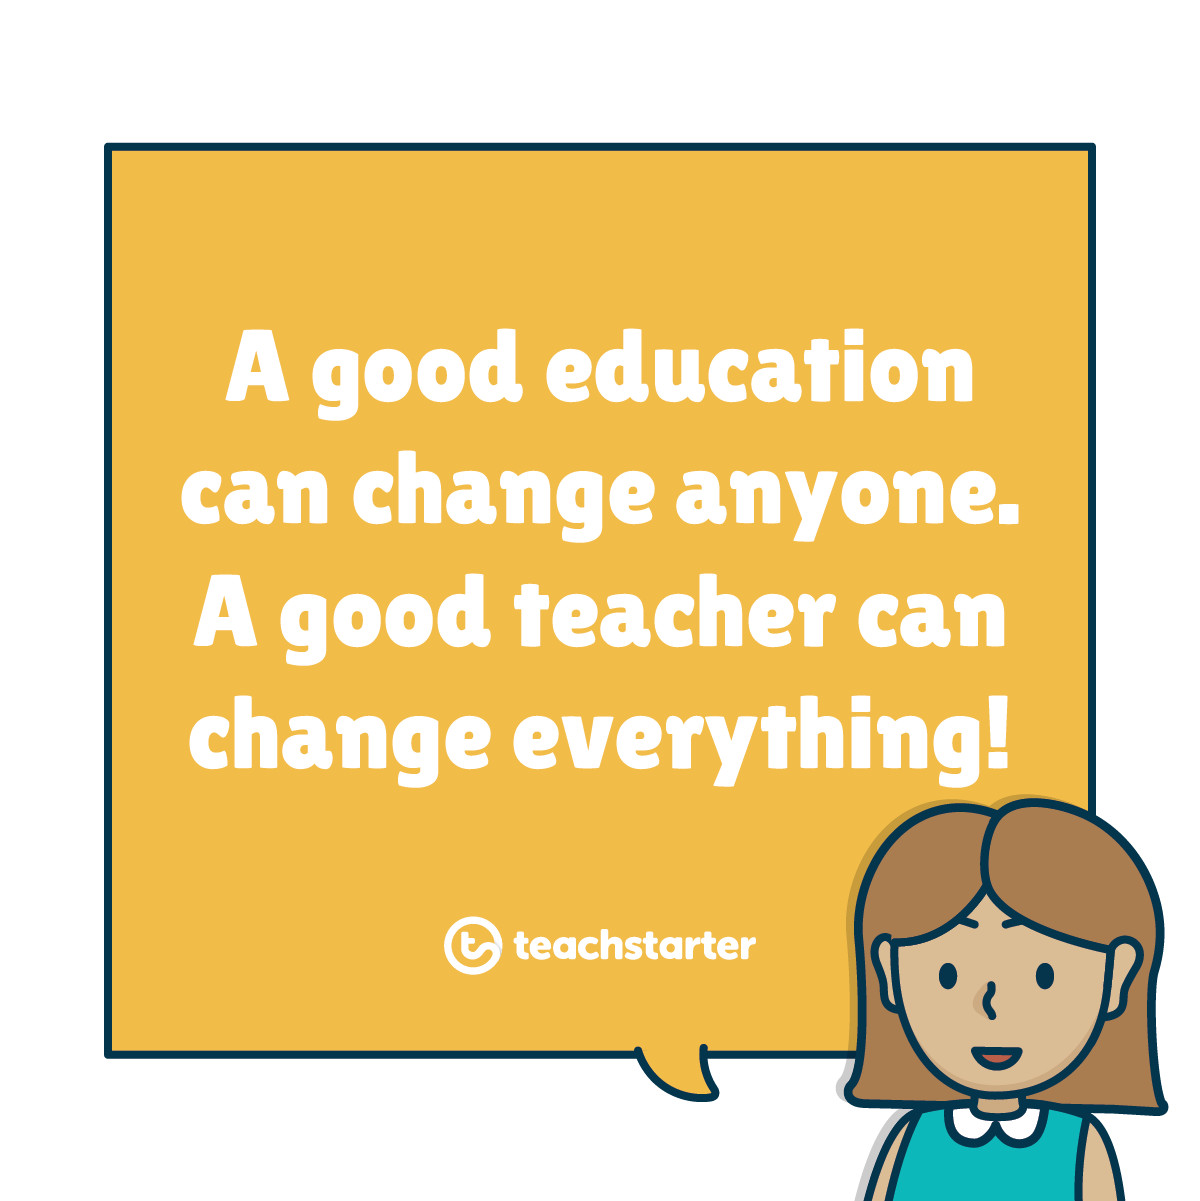 Educational Quotes For Teachers
 10 Inspirational Quotes for Teachers